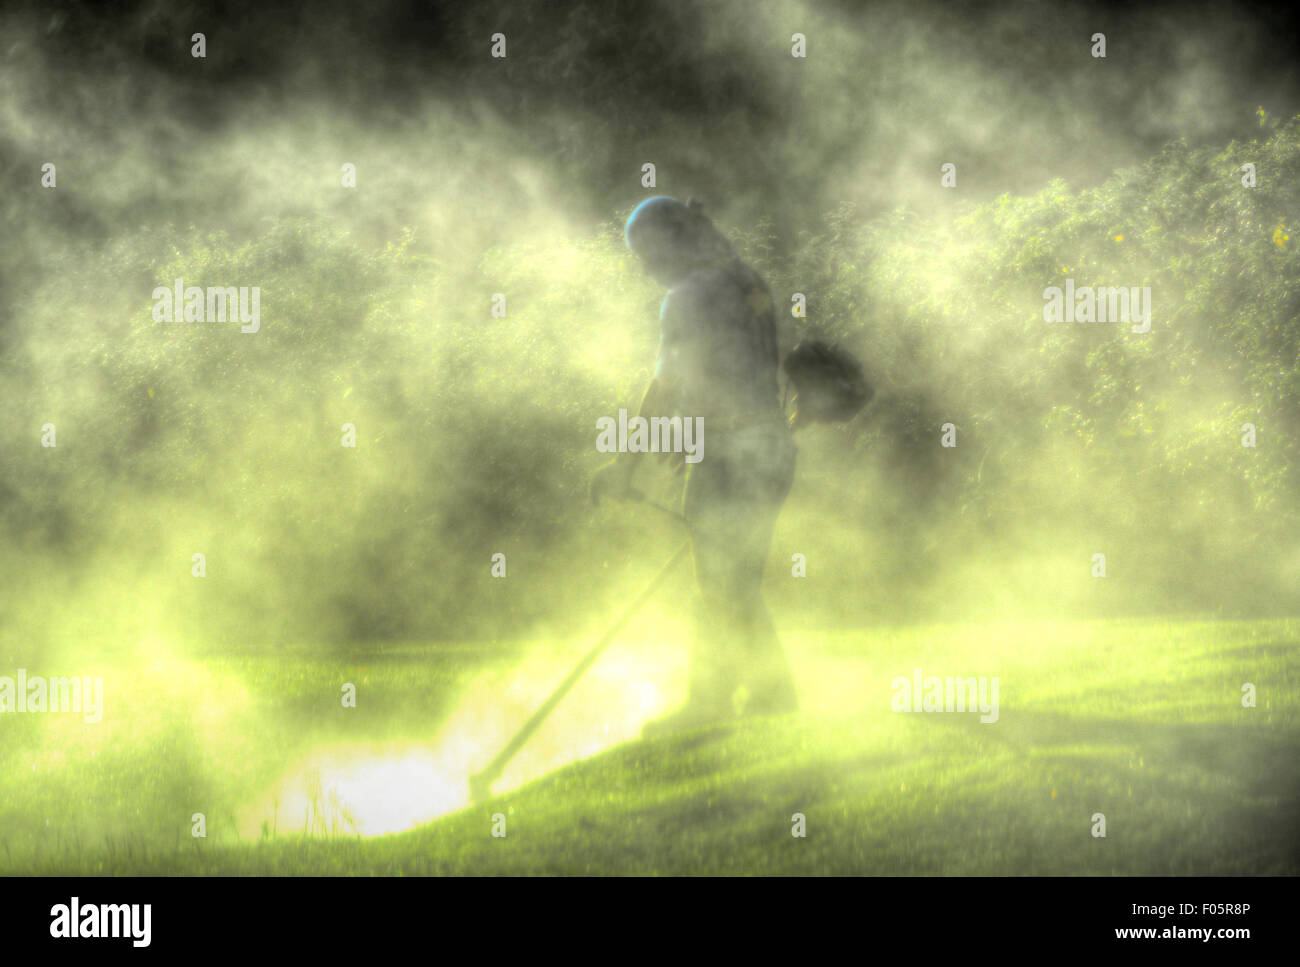 Man cutting grass in a foggy morning Stock Photo